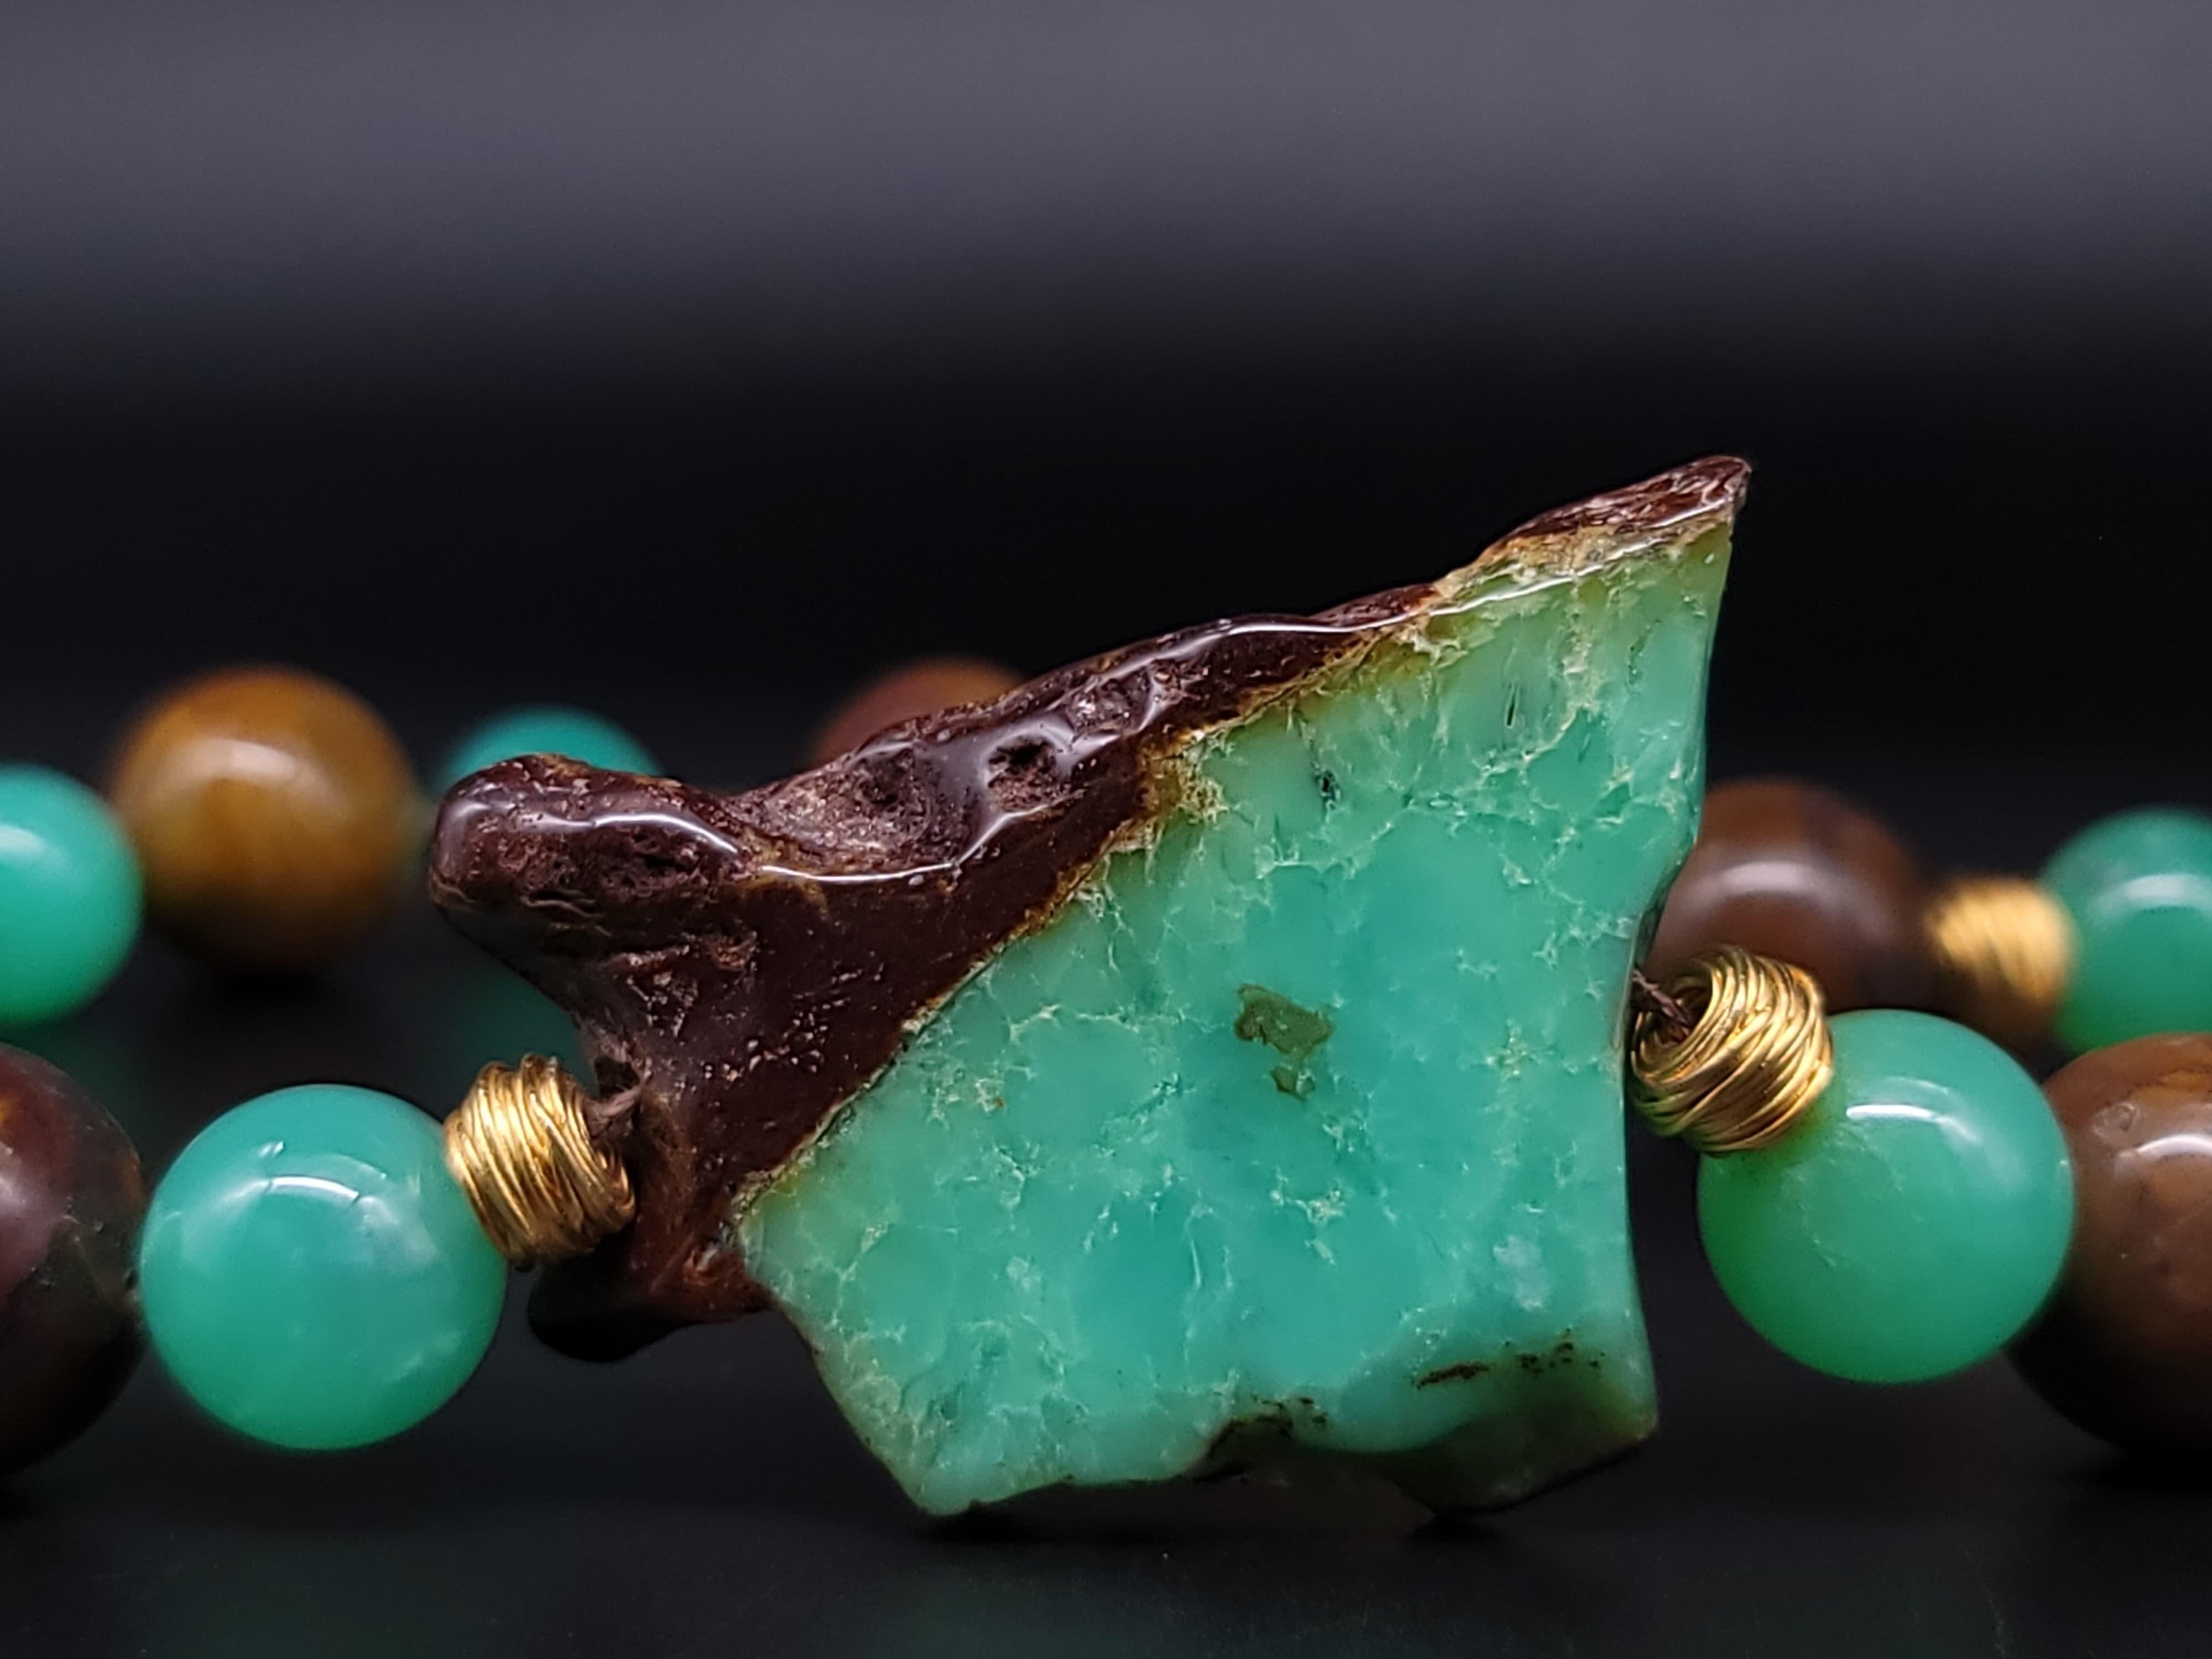 Mixed Cut A.Jeschel Apple green Chrysoprase beads polished in Germany. For Sale